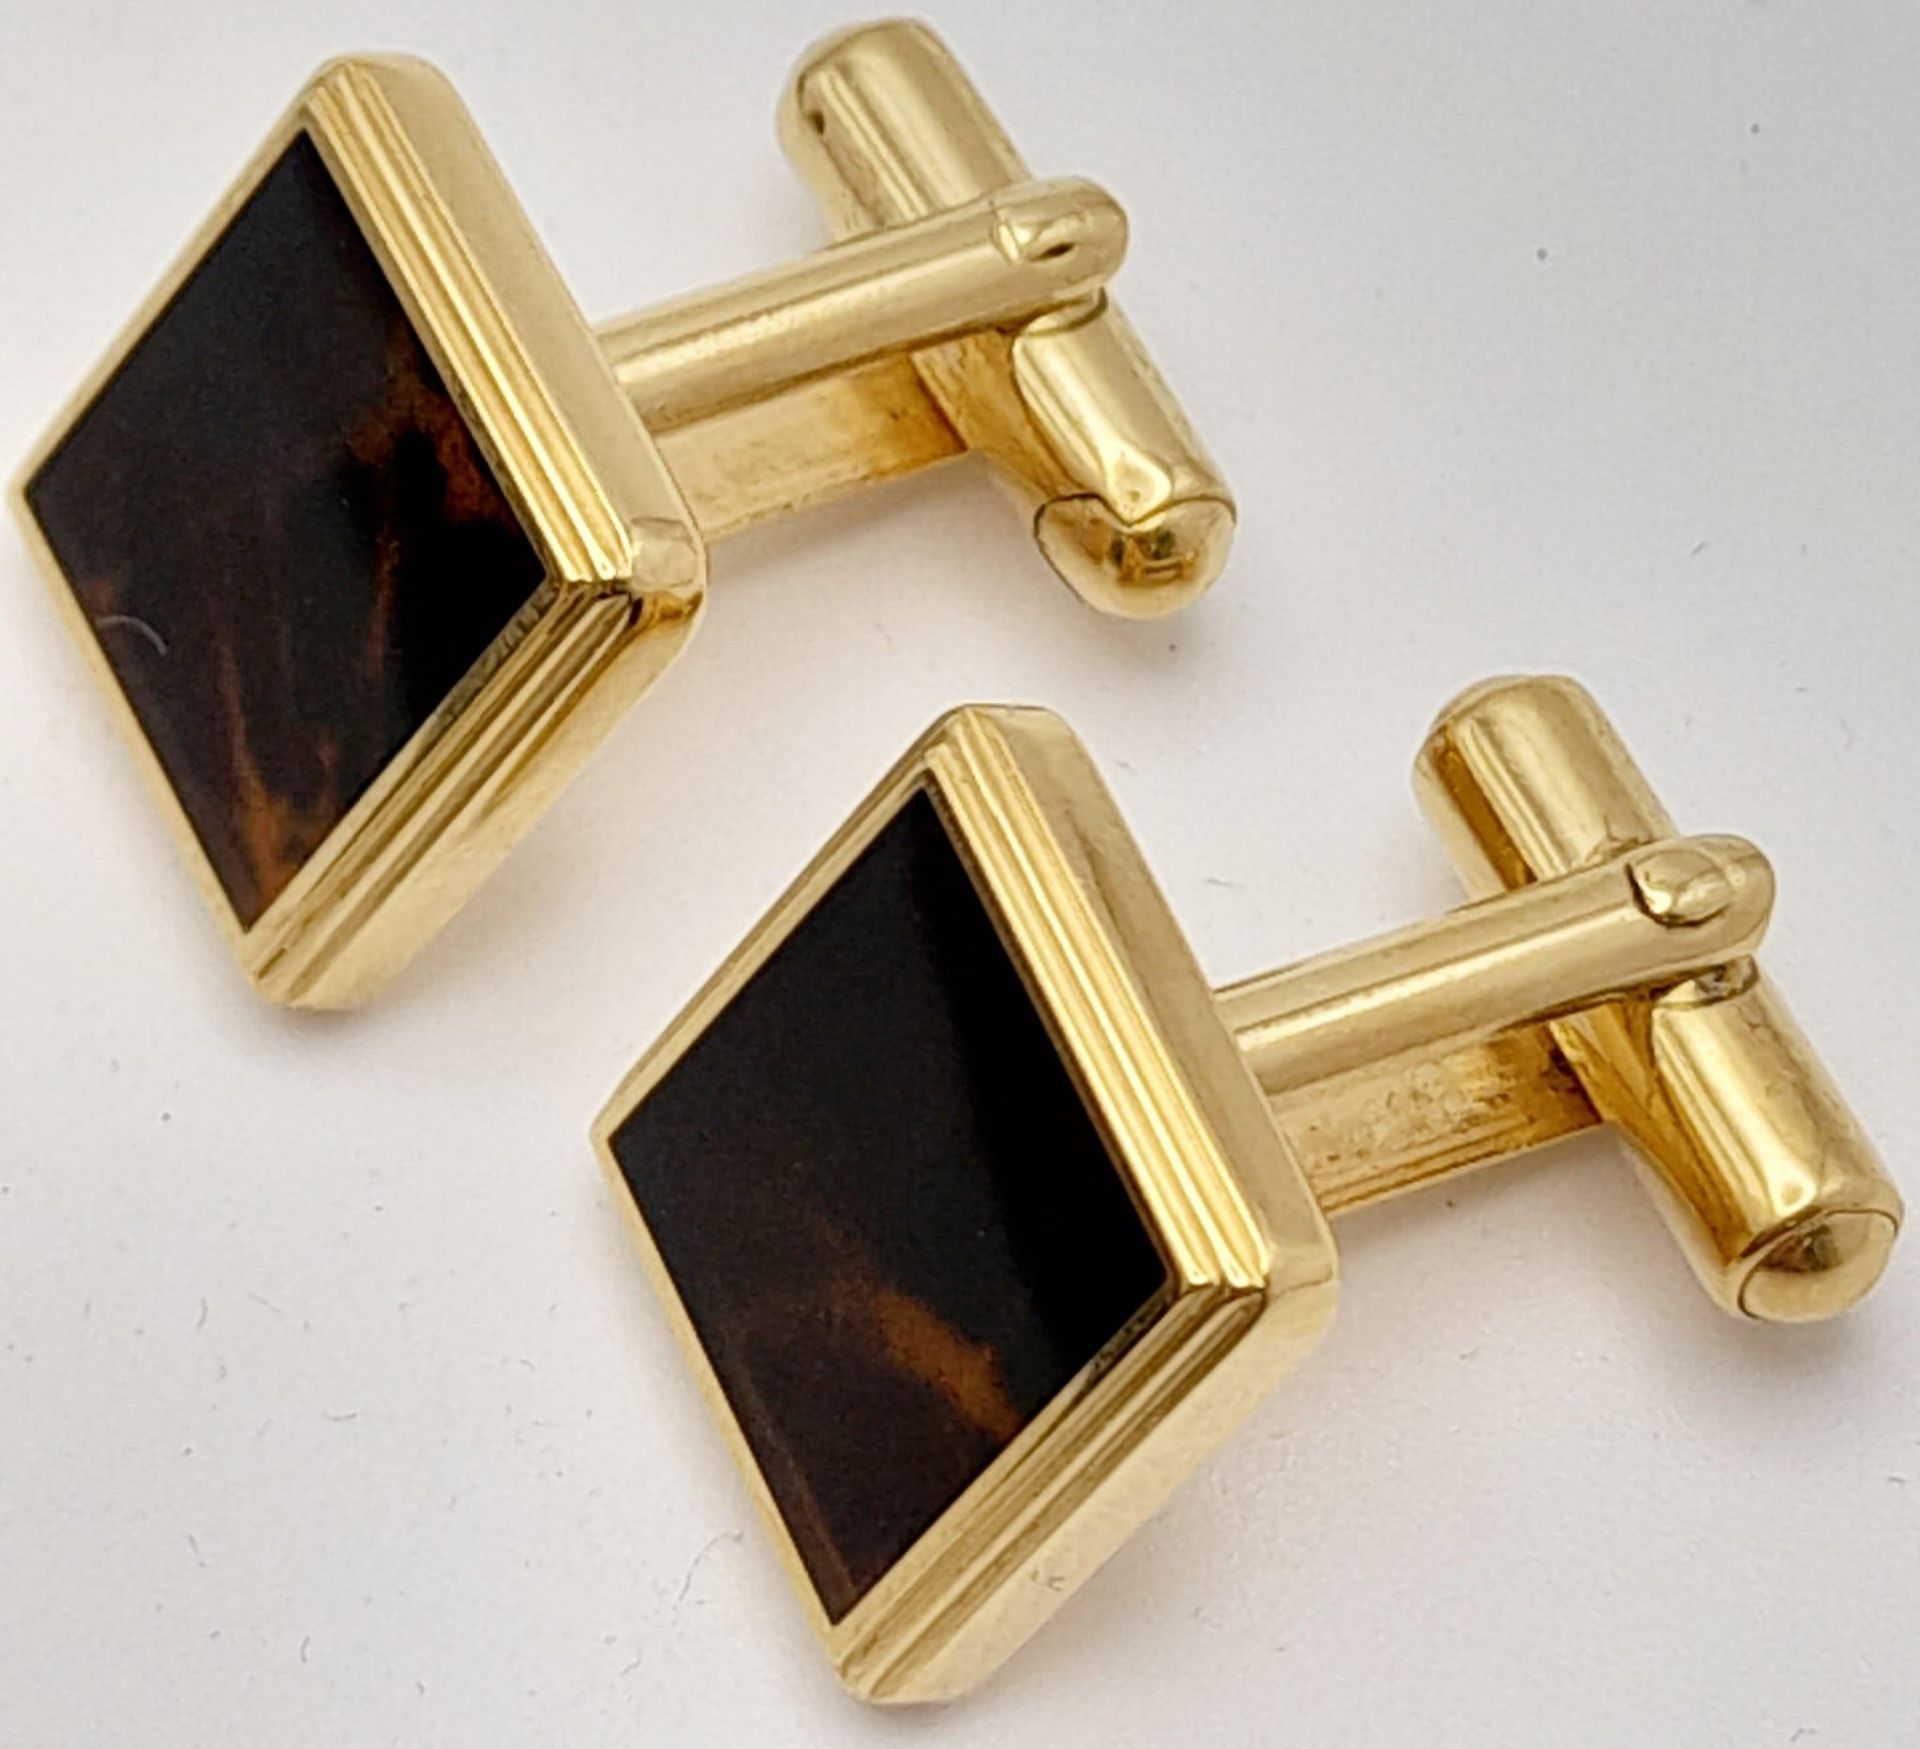 An Excellent Condition Pair of Square Yellow Gold Gilt Tortoiseshell Cufflinks by Dunhill in their - Image 2 of 8